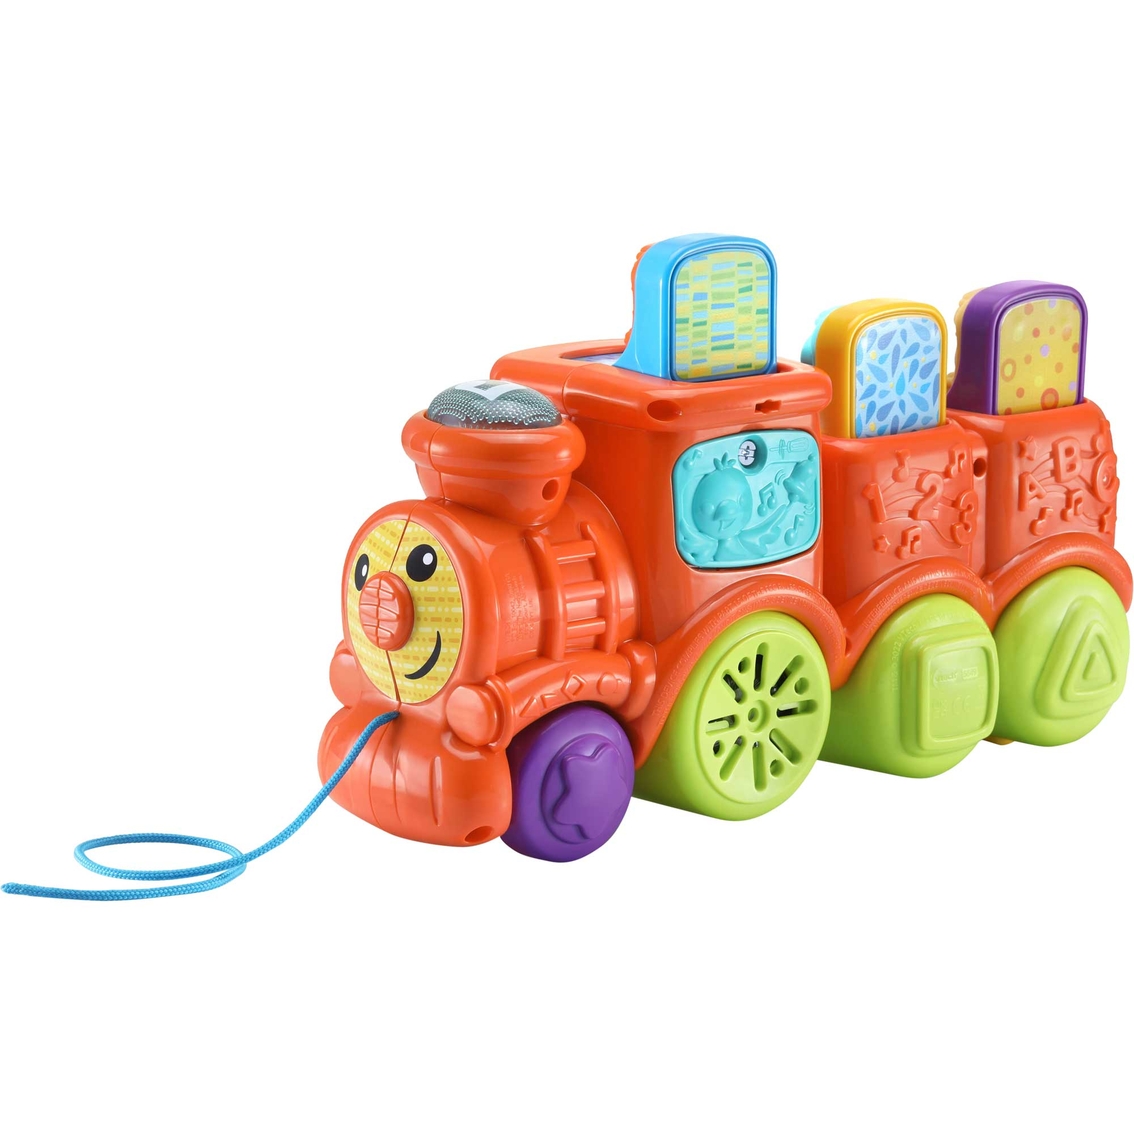 Vtech Pop and Sing Animal Train - Image 3 of 5